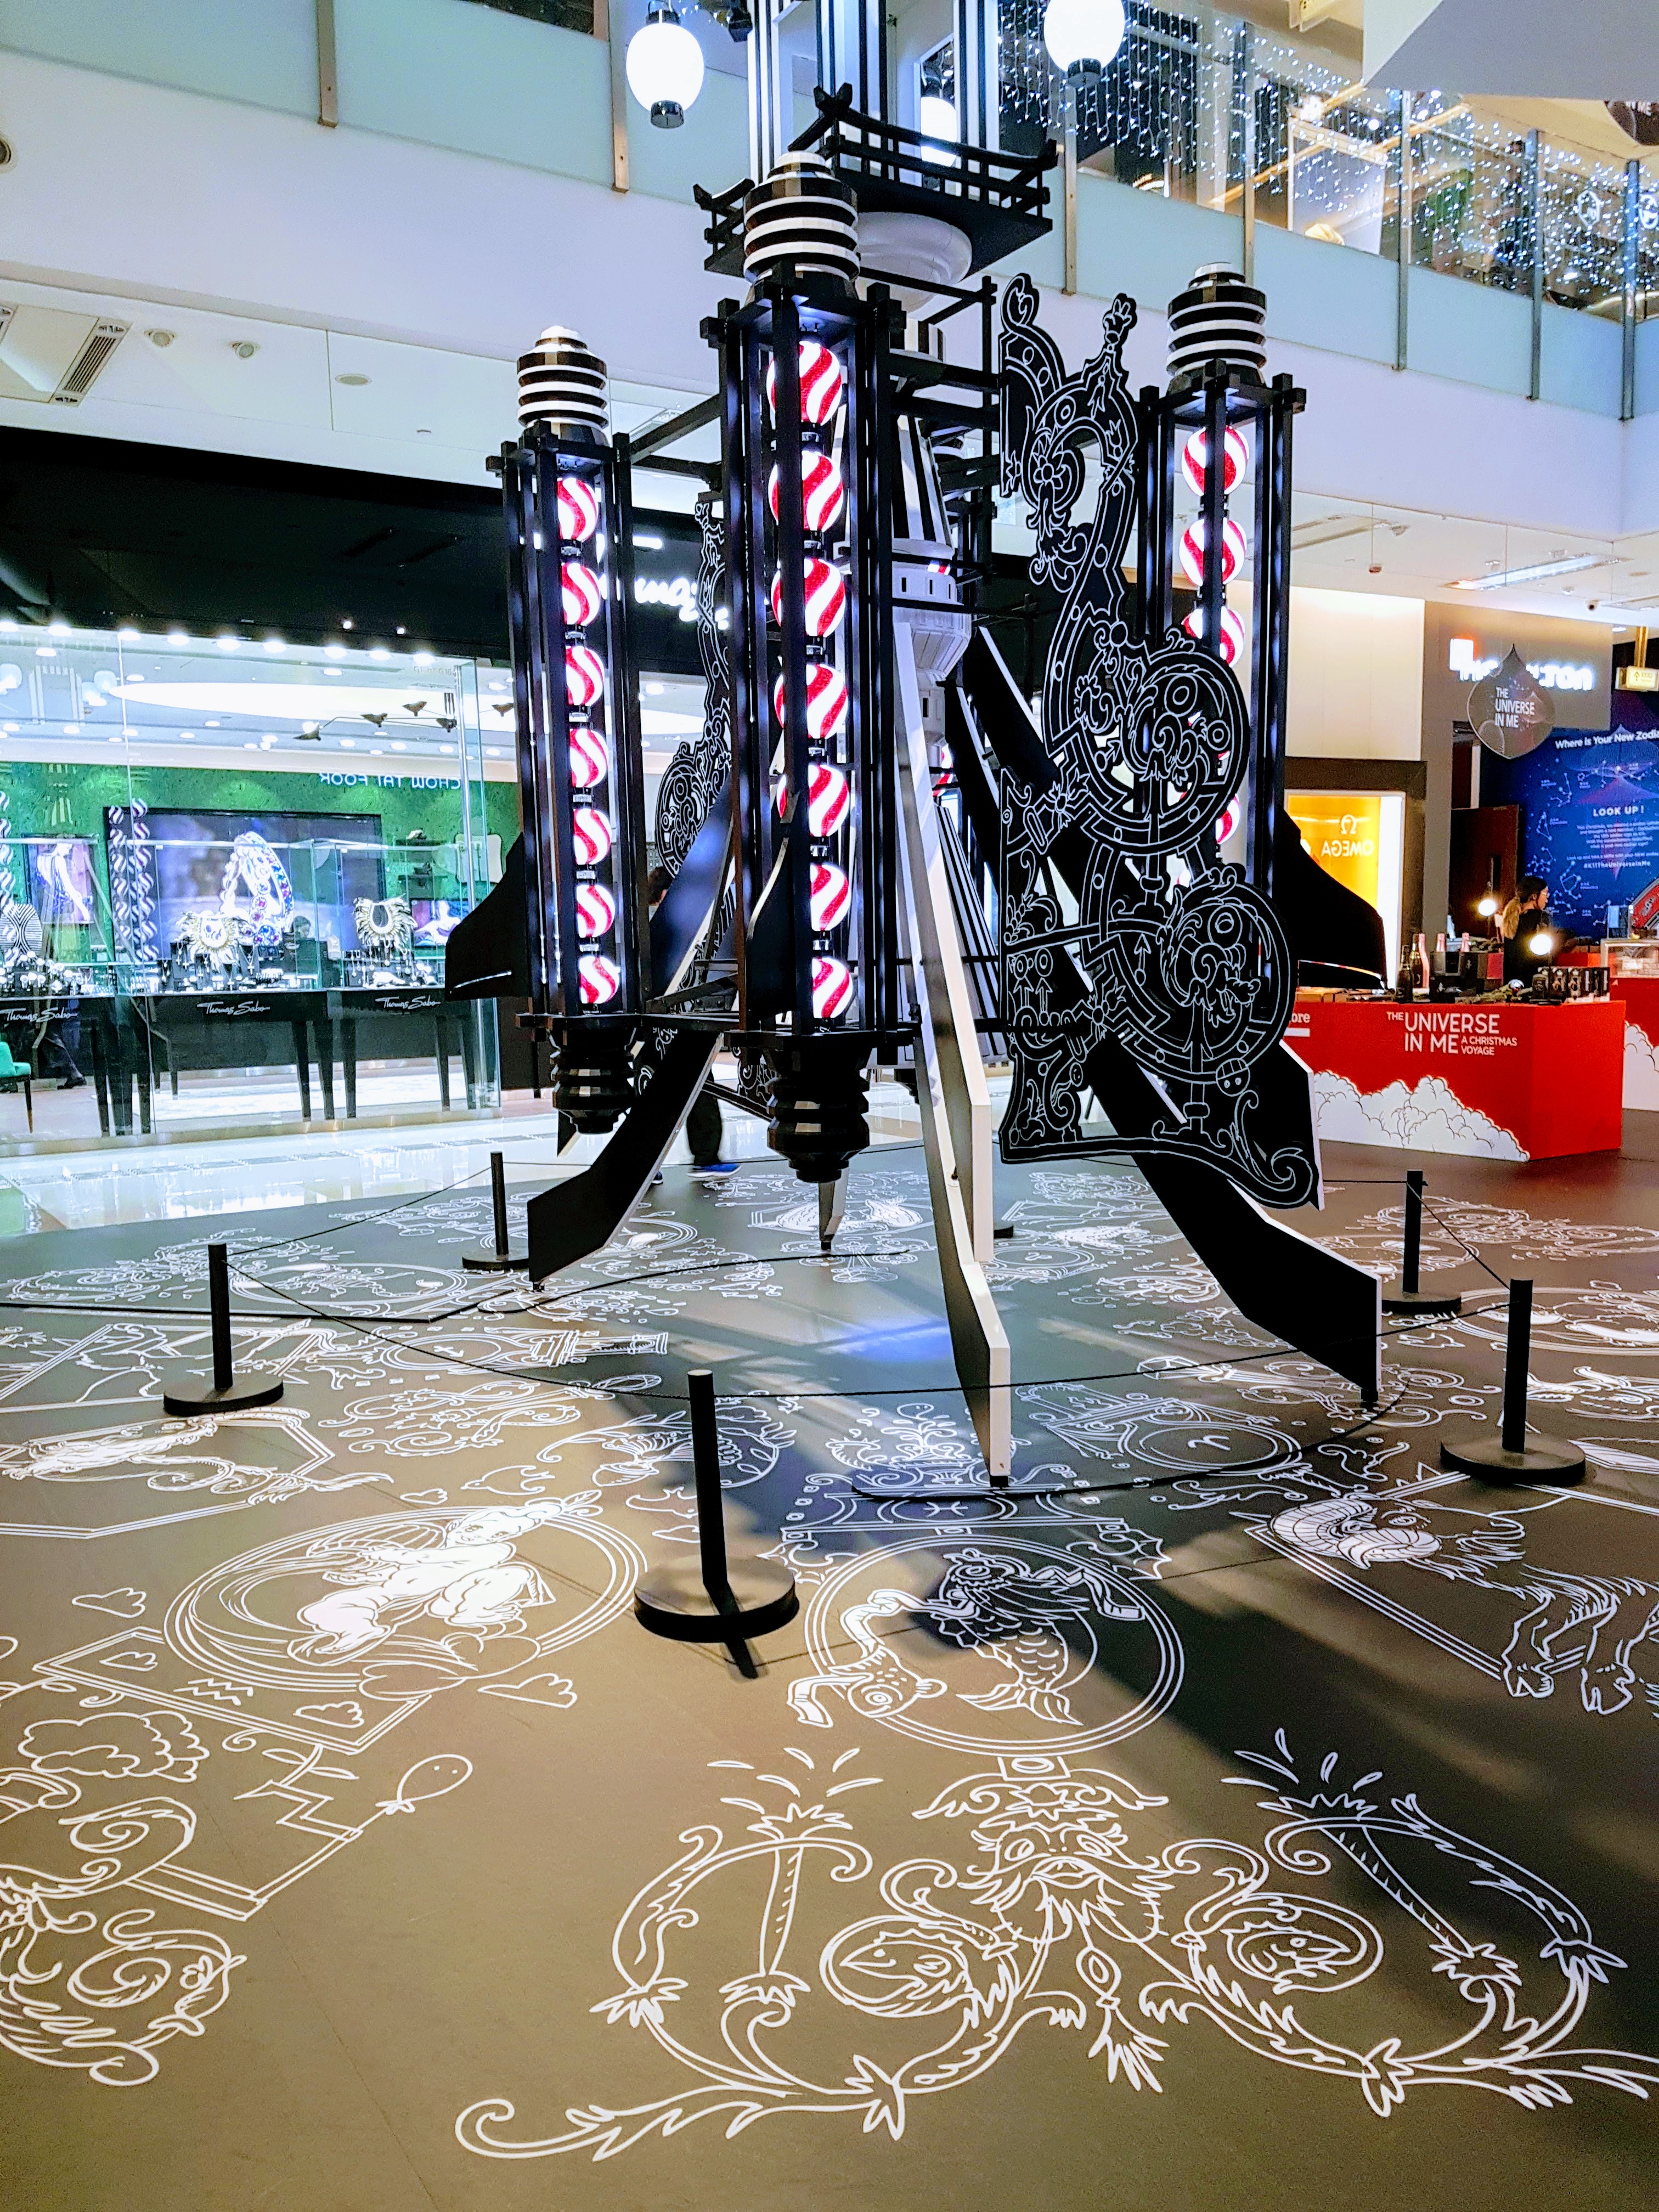 The Universe in Me - Christmas voyage in Hong Kong mall - k11 art